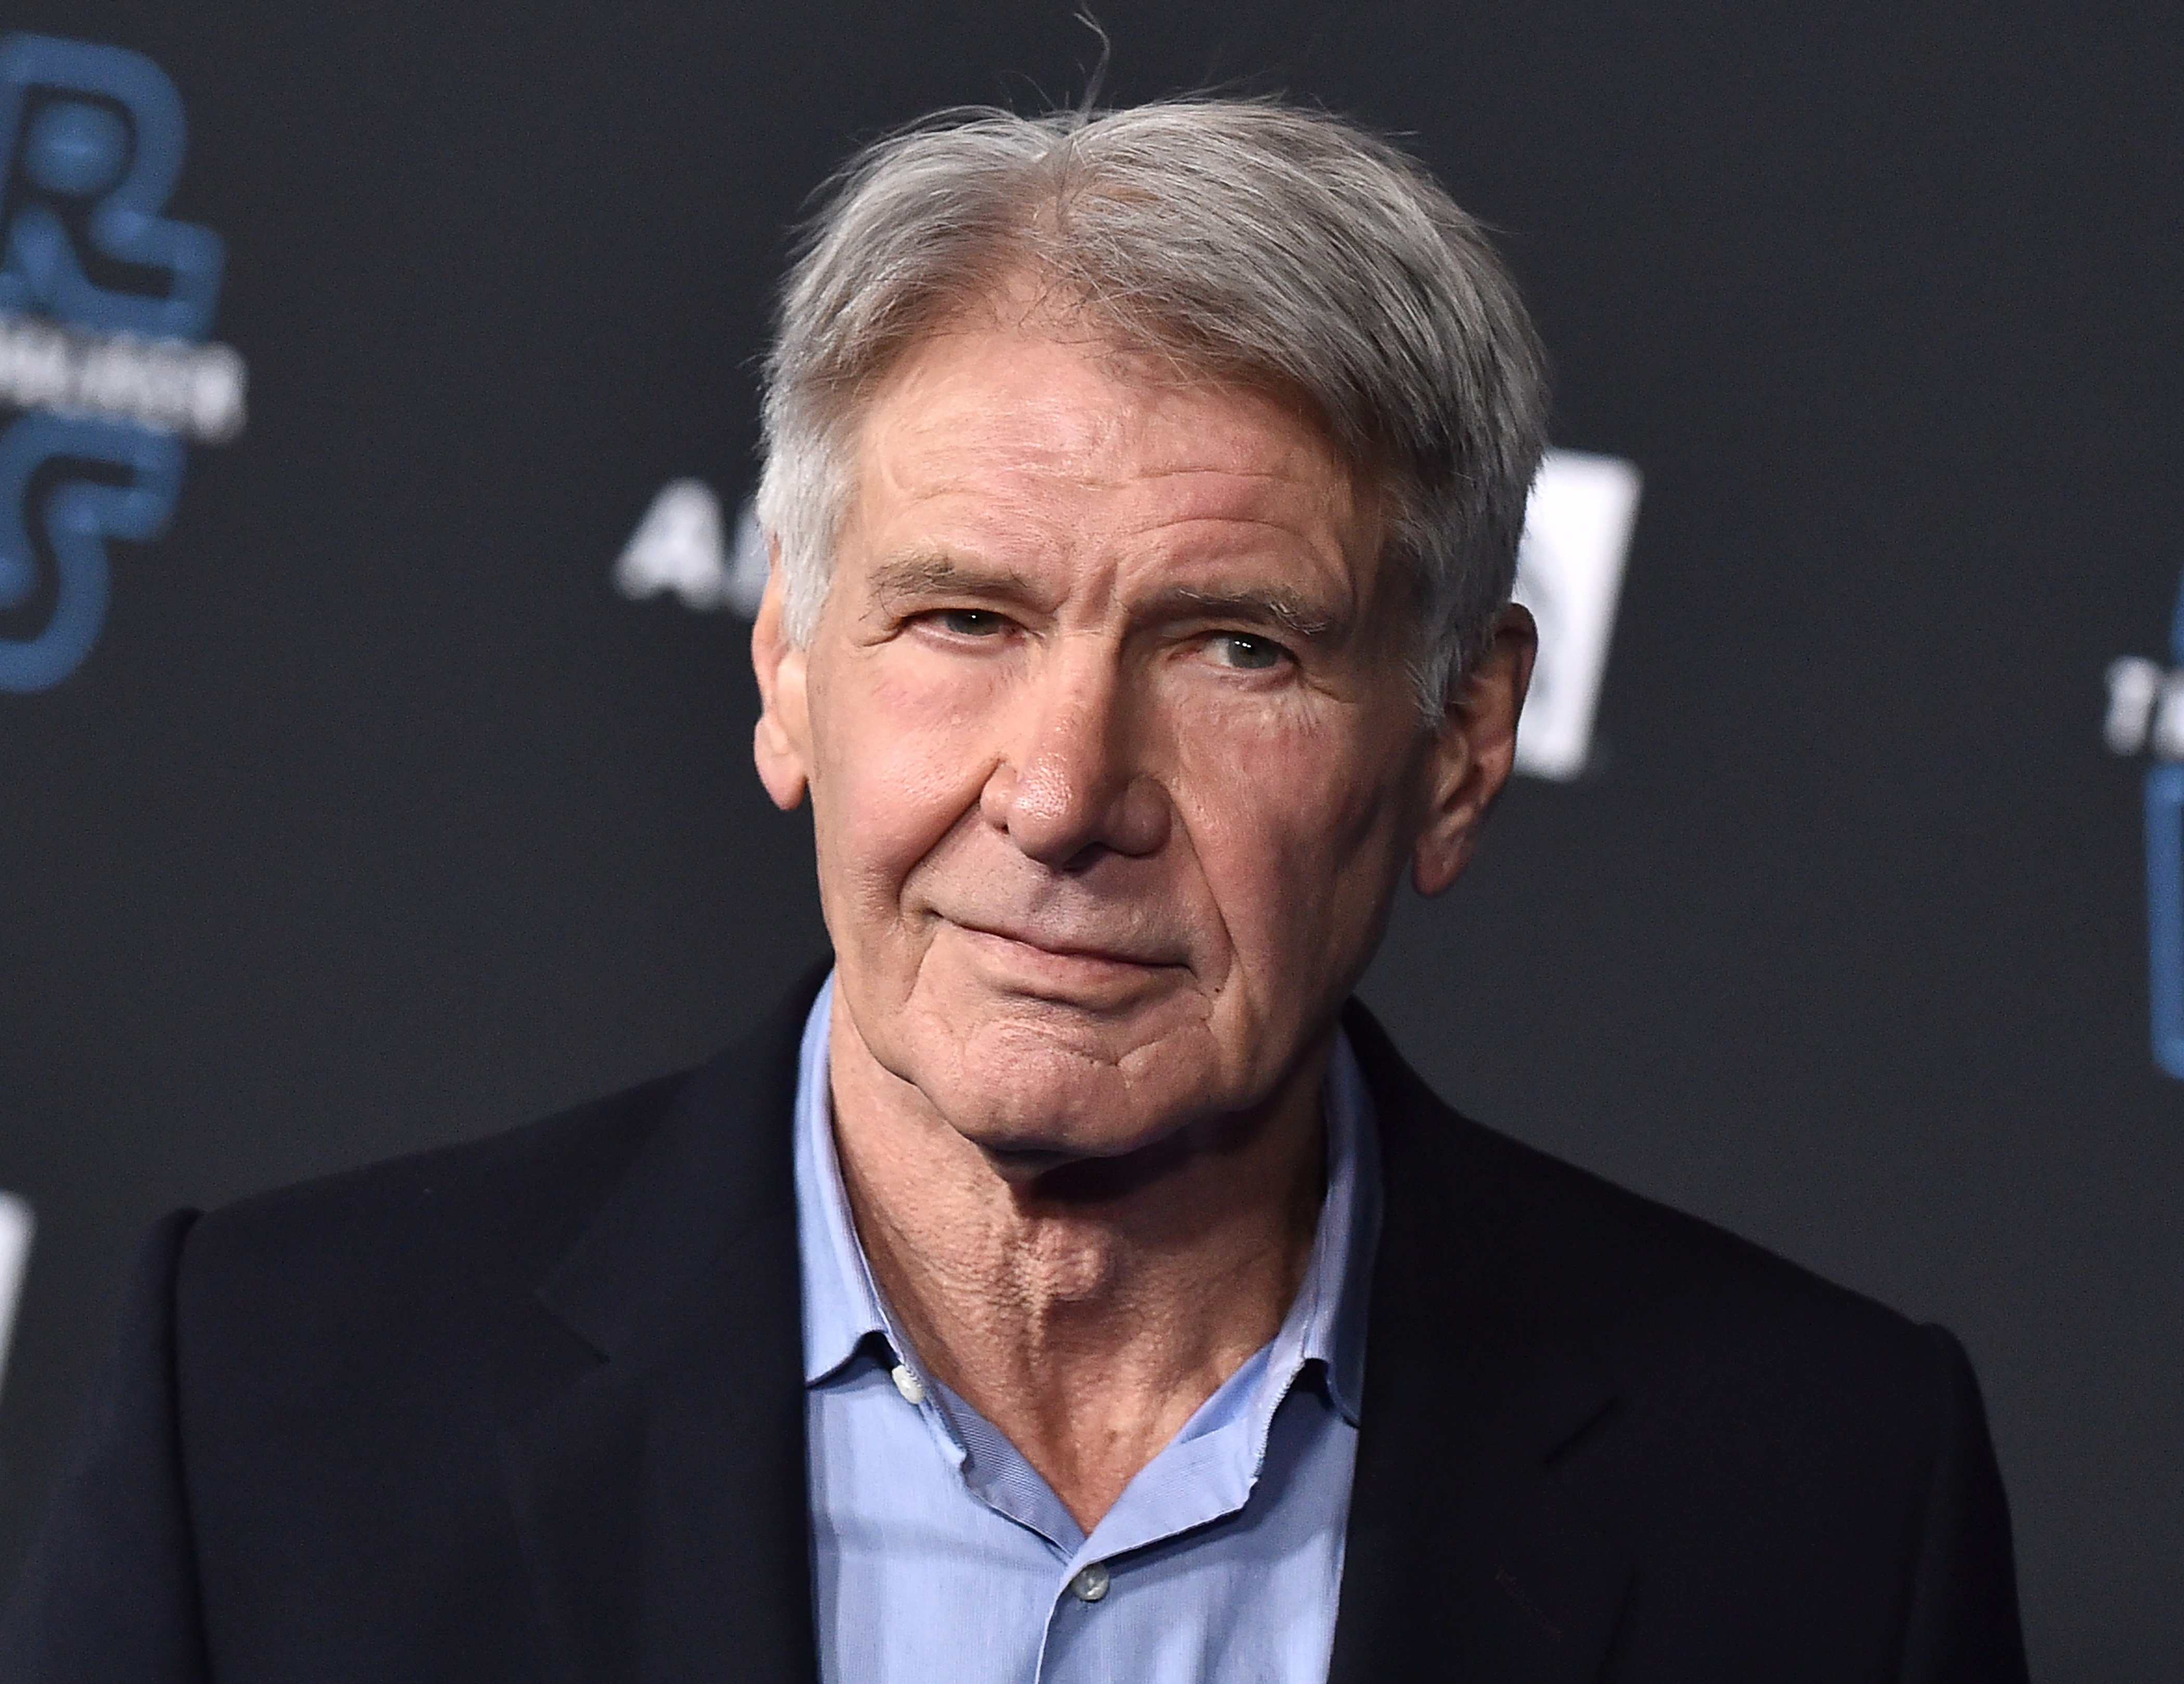 Harrison Ford arrives for the "Star Wars: The Rise of Skywalker" premiere on December 16, 2019 in Hollywood, California | Photo: Shutterstock 